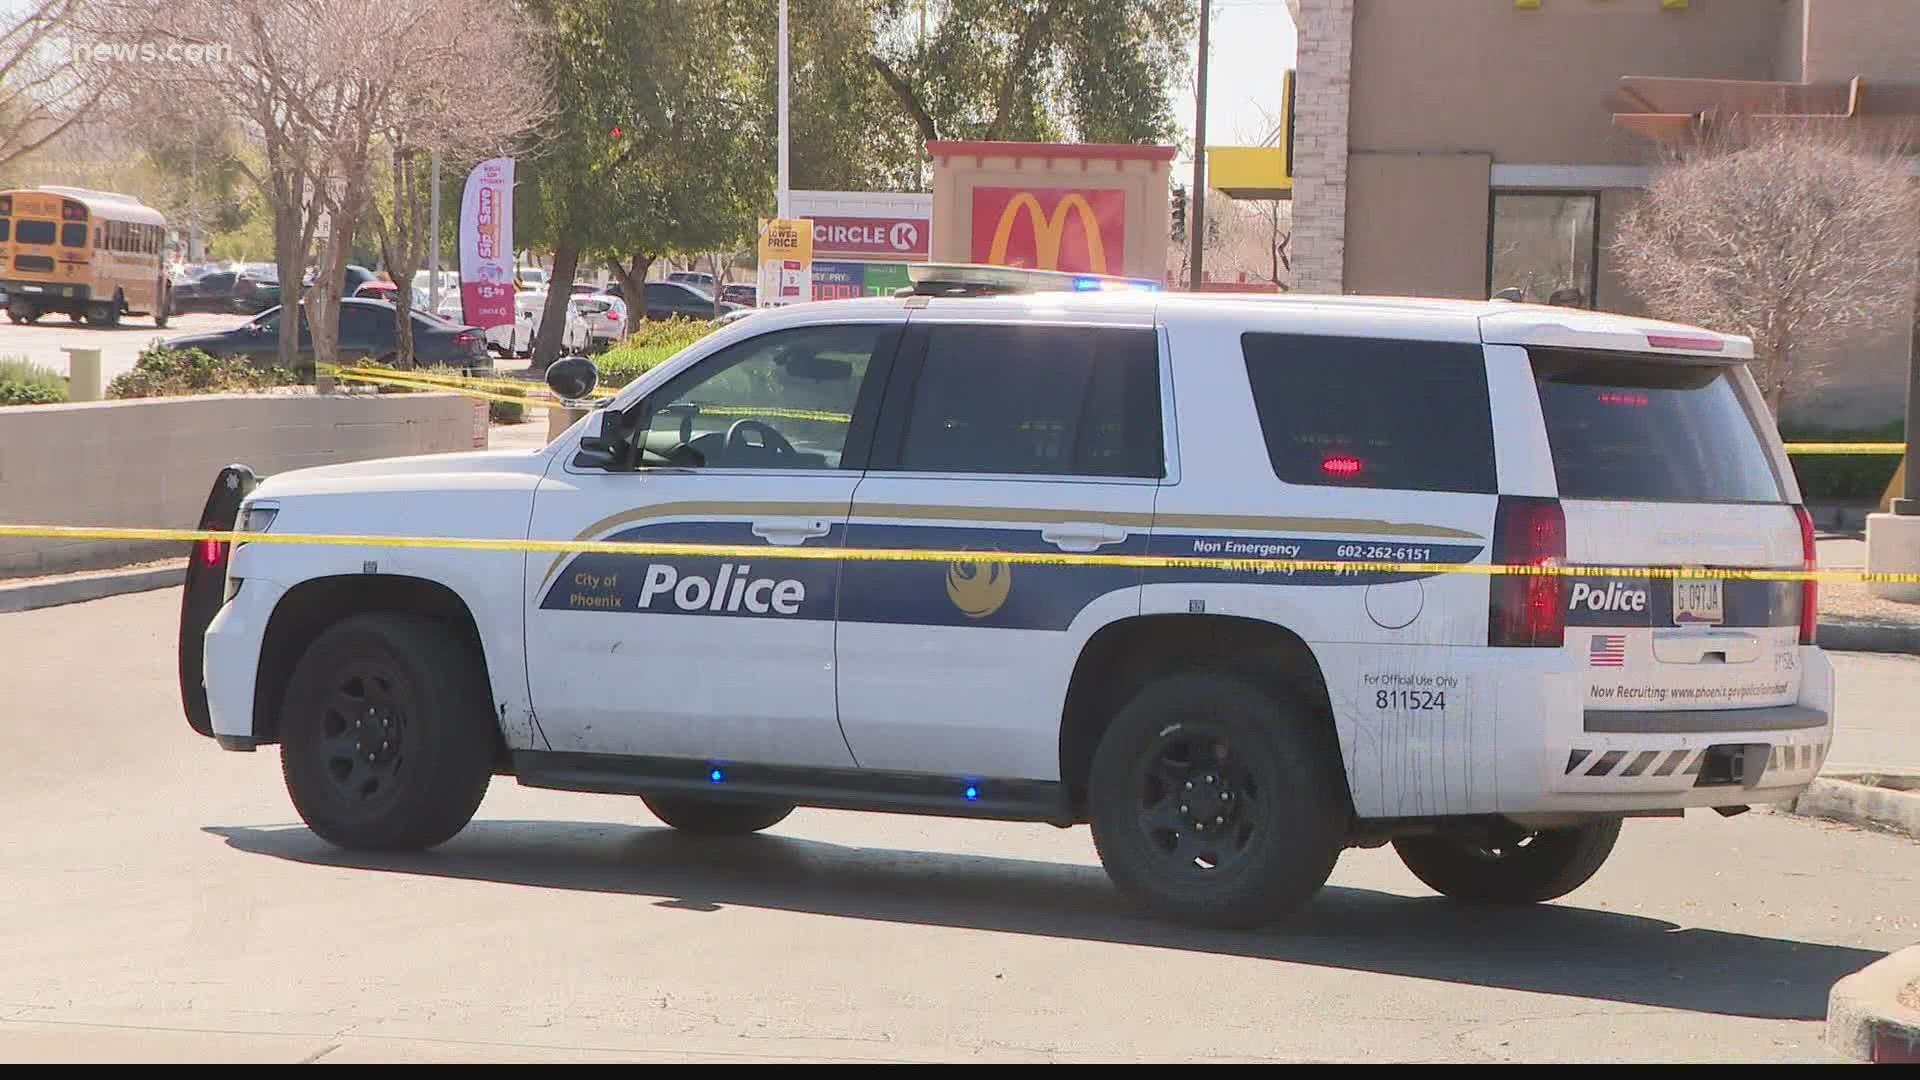 16-year-old Christopher Track turned himself in to Phoenix Police on Monday. Track was wanted in connection to the murder of a McDonald's employee, Prince Nedd.